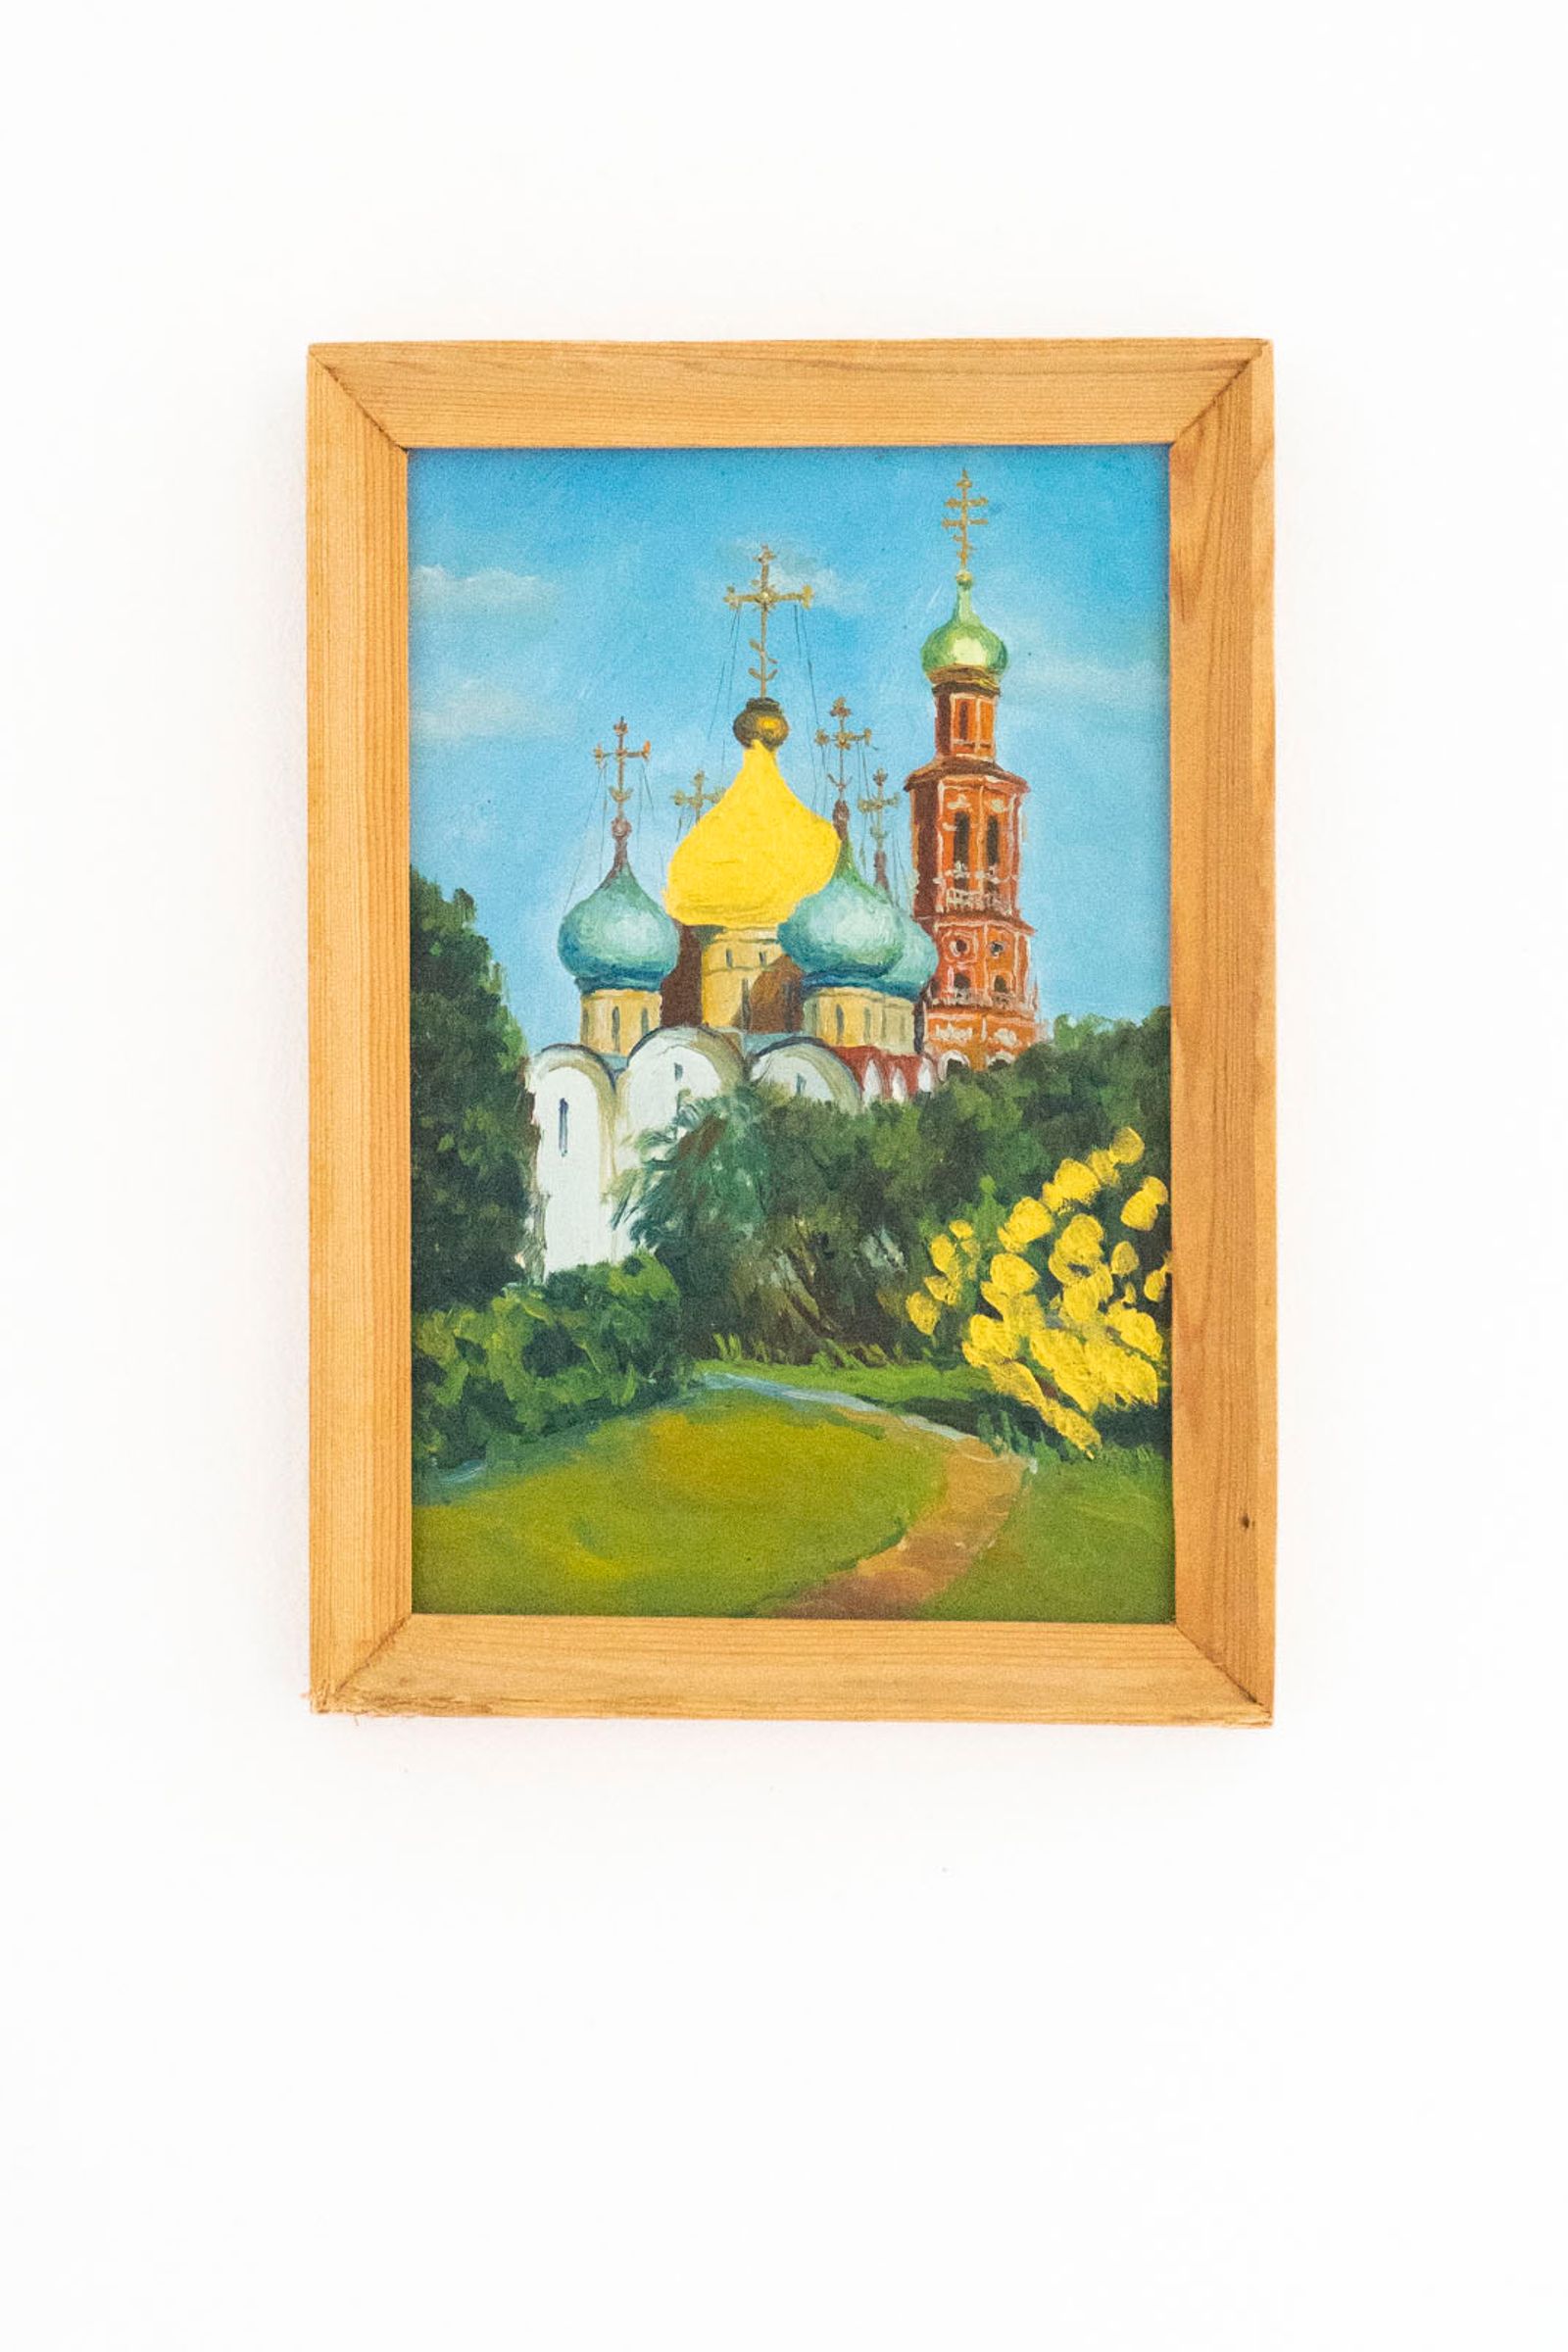 © Ira Thiessen - Gold Lacquer on Russian Painting, Orthodox Church